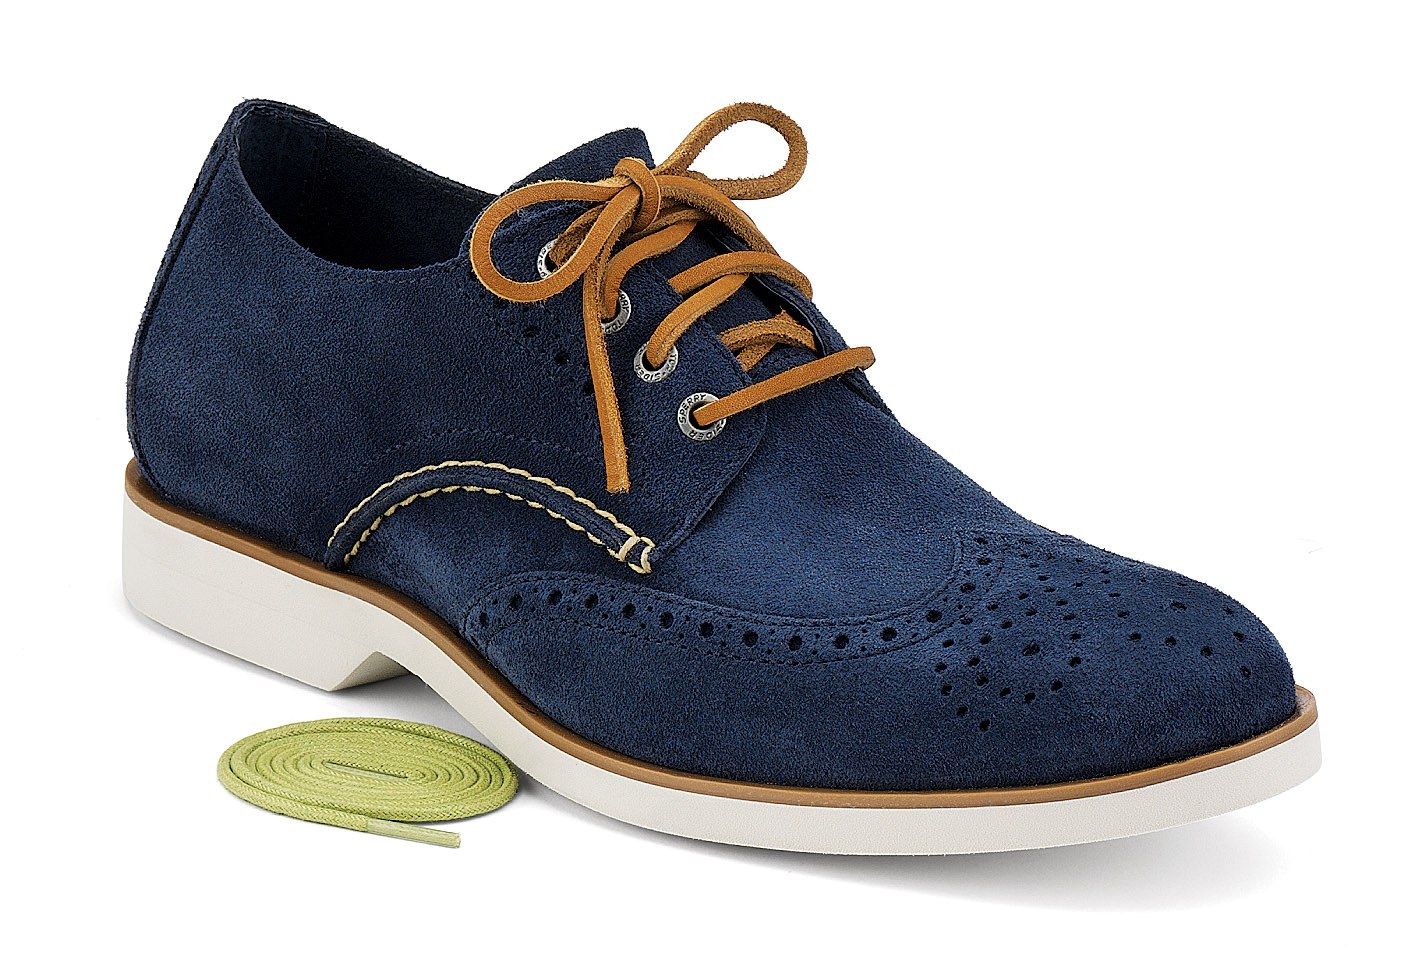 Sperry_Top-Sider_Boat_oxford_wingtip_